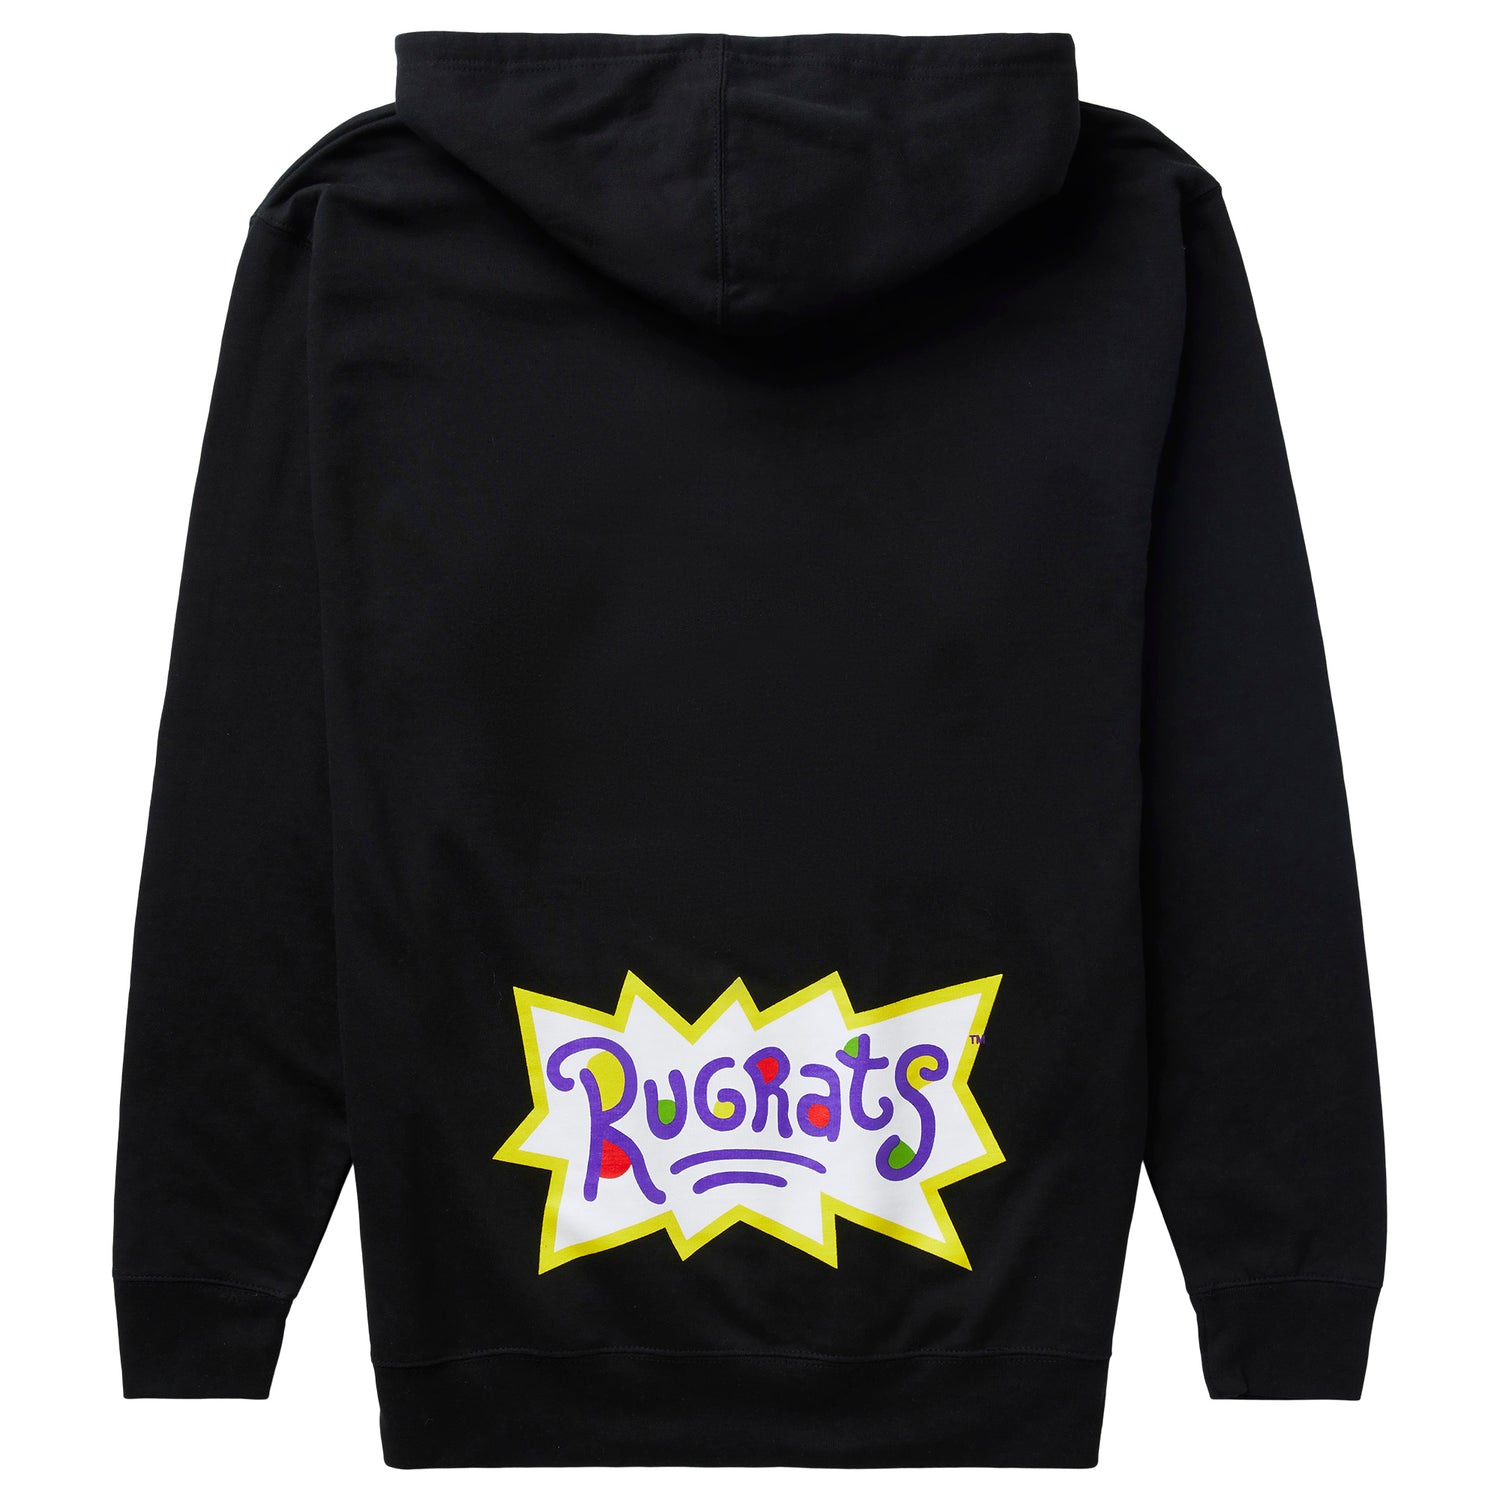 RUGRATS CHASE PULLOVER HOODIE - BLACK